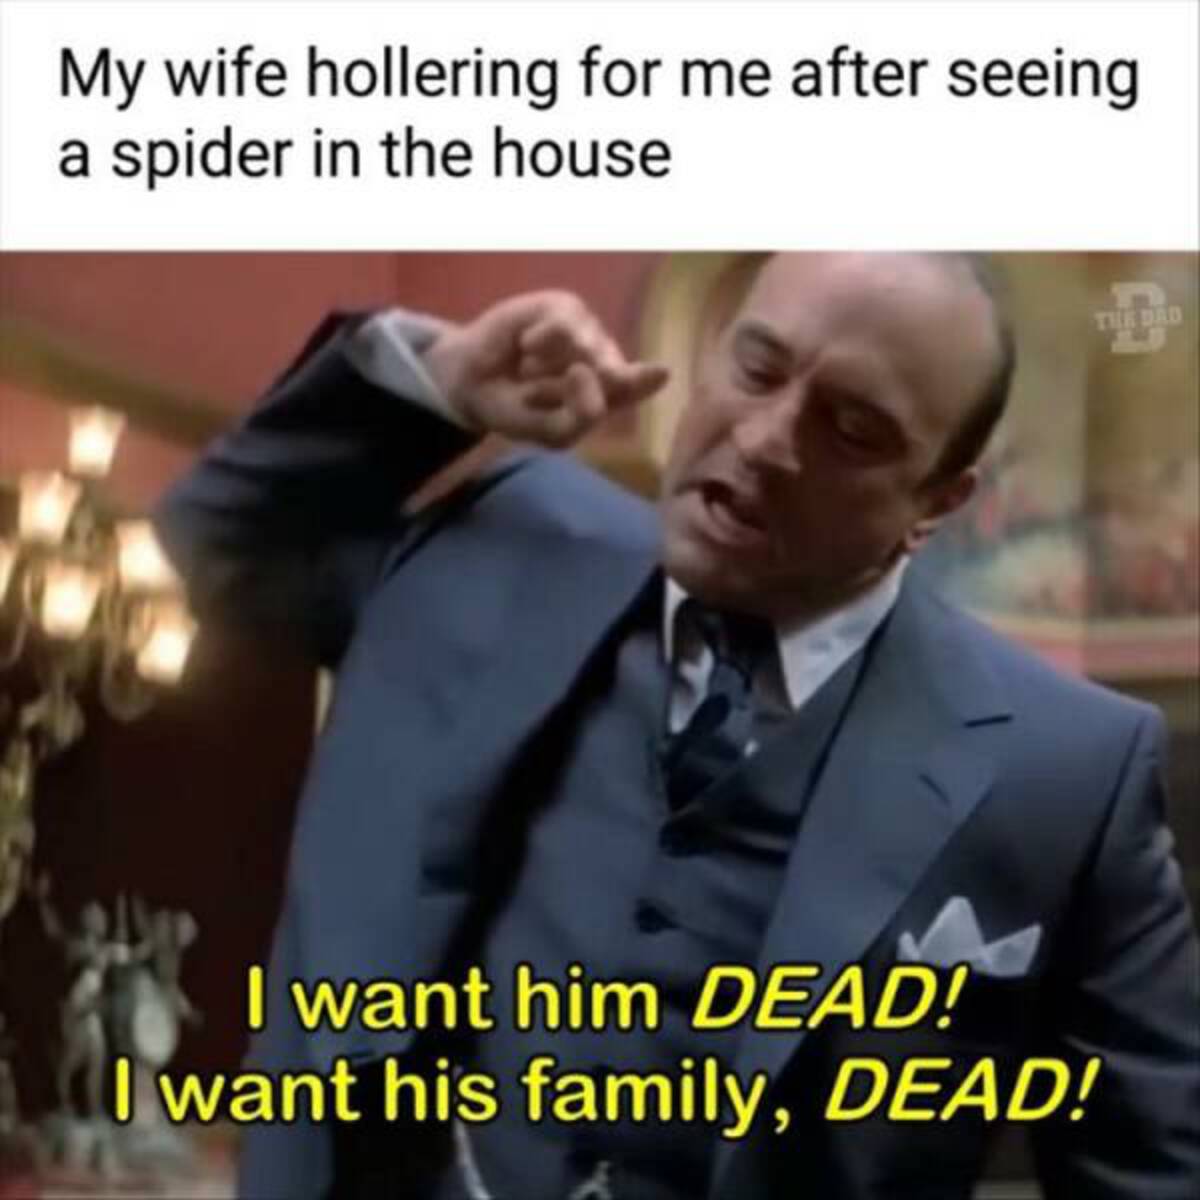 photo caption - My wife hollering for me after seeing a spider in the house I want him Dead! I want his family, Dead! The Dad